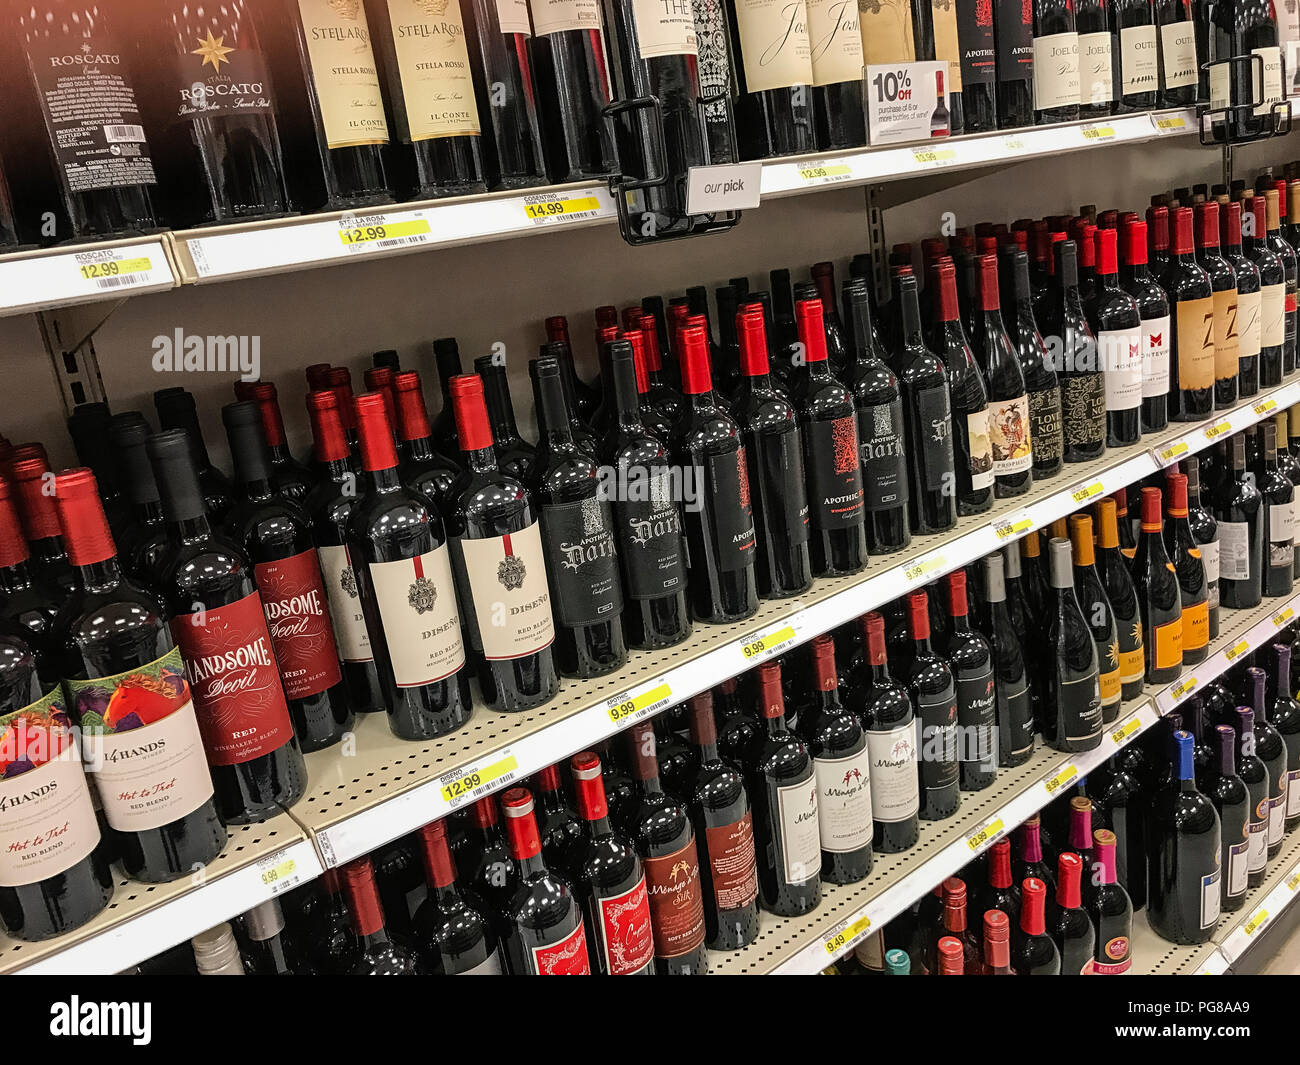 Wine bottle display in a wine store, Marlton, New Jersey, USA. Stock Photo